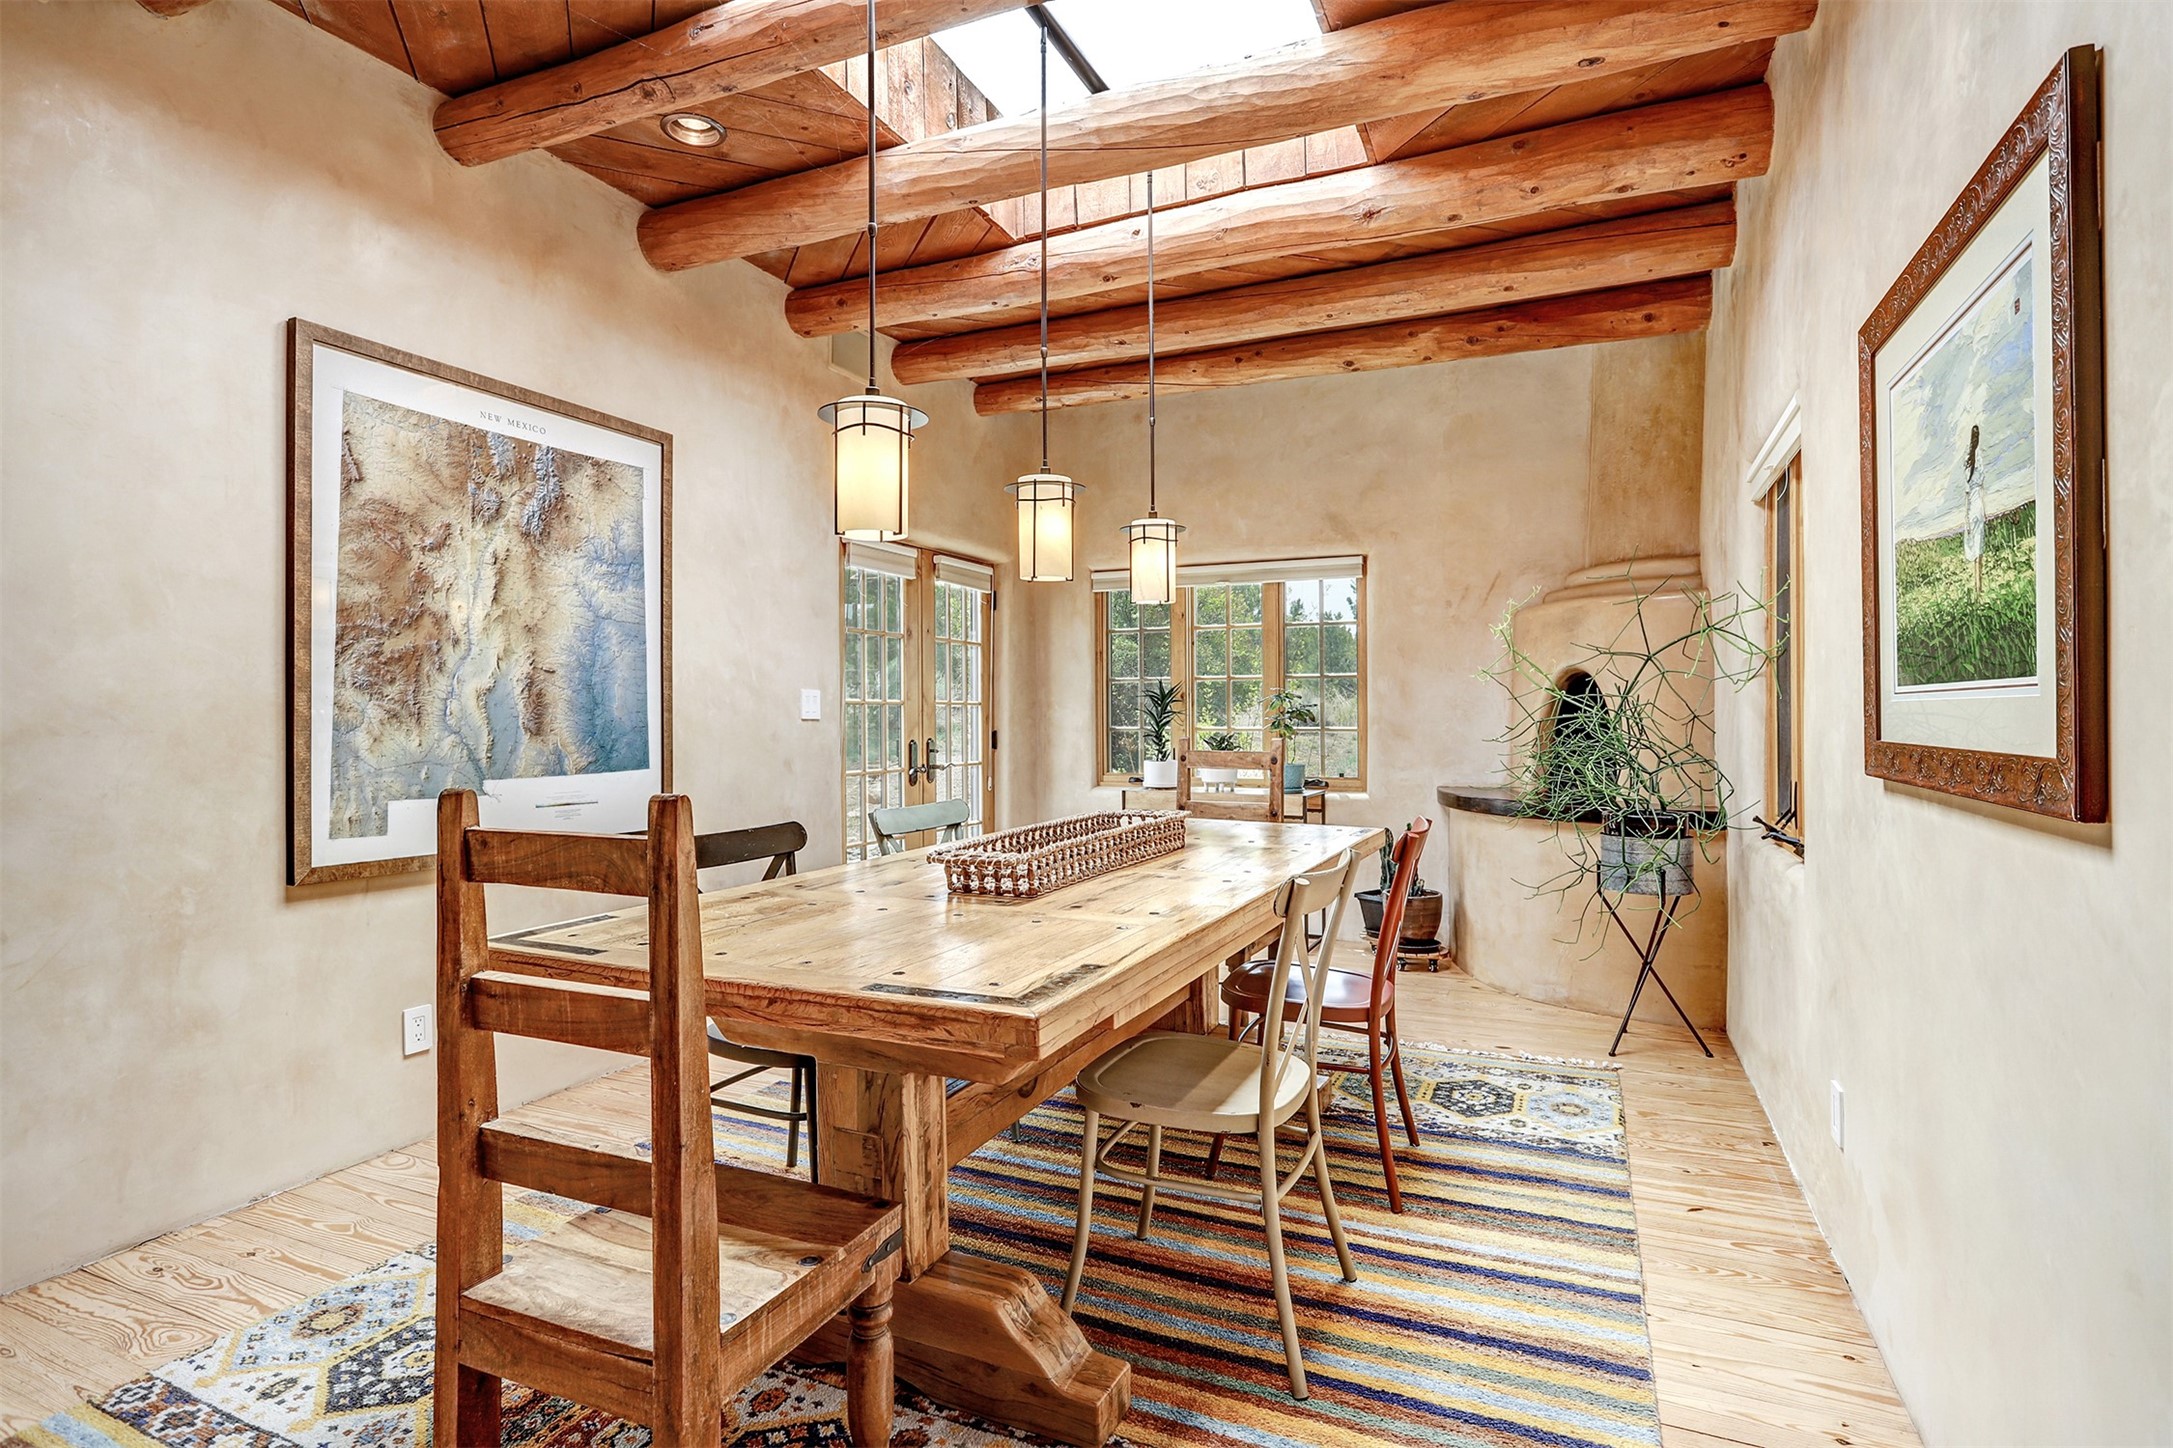 70 Apache Plume, Santa Fe, New Mexico 87508, 4 Bedrooms Bedrooms, ,3 BathroomsBathrooms,Residential,For Sale,70 Apache Plume,202337702